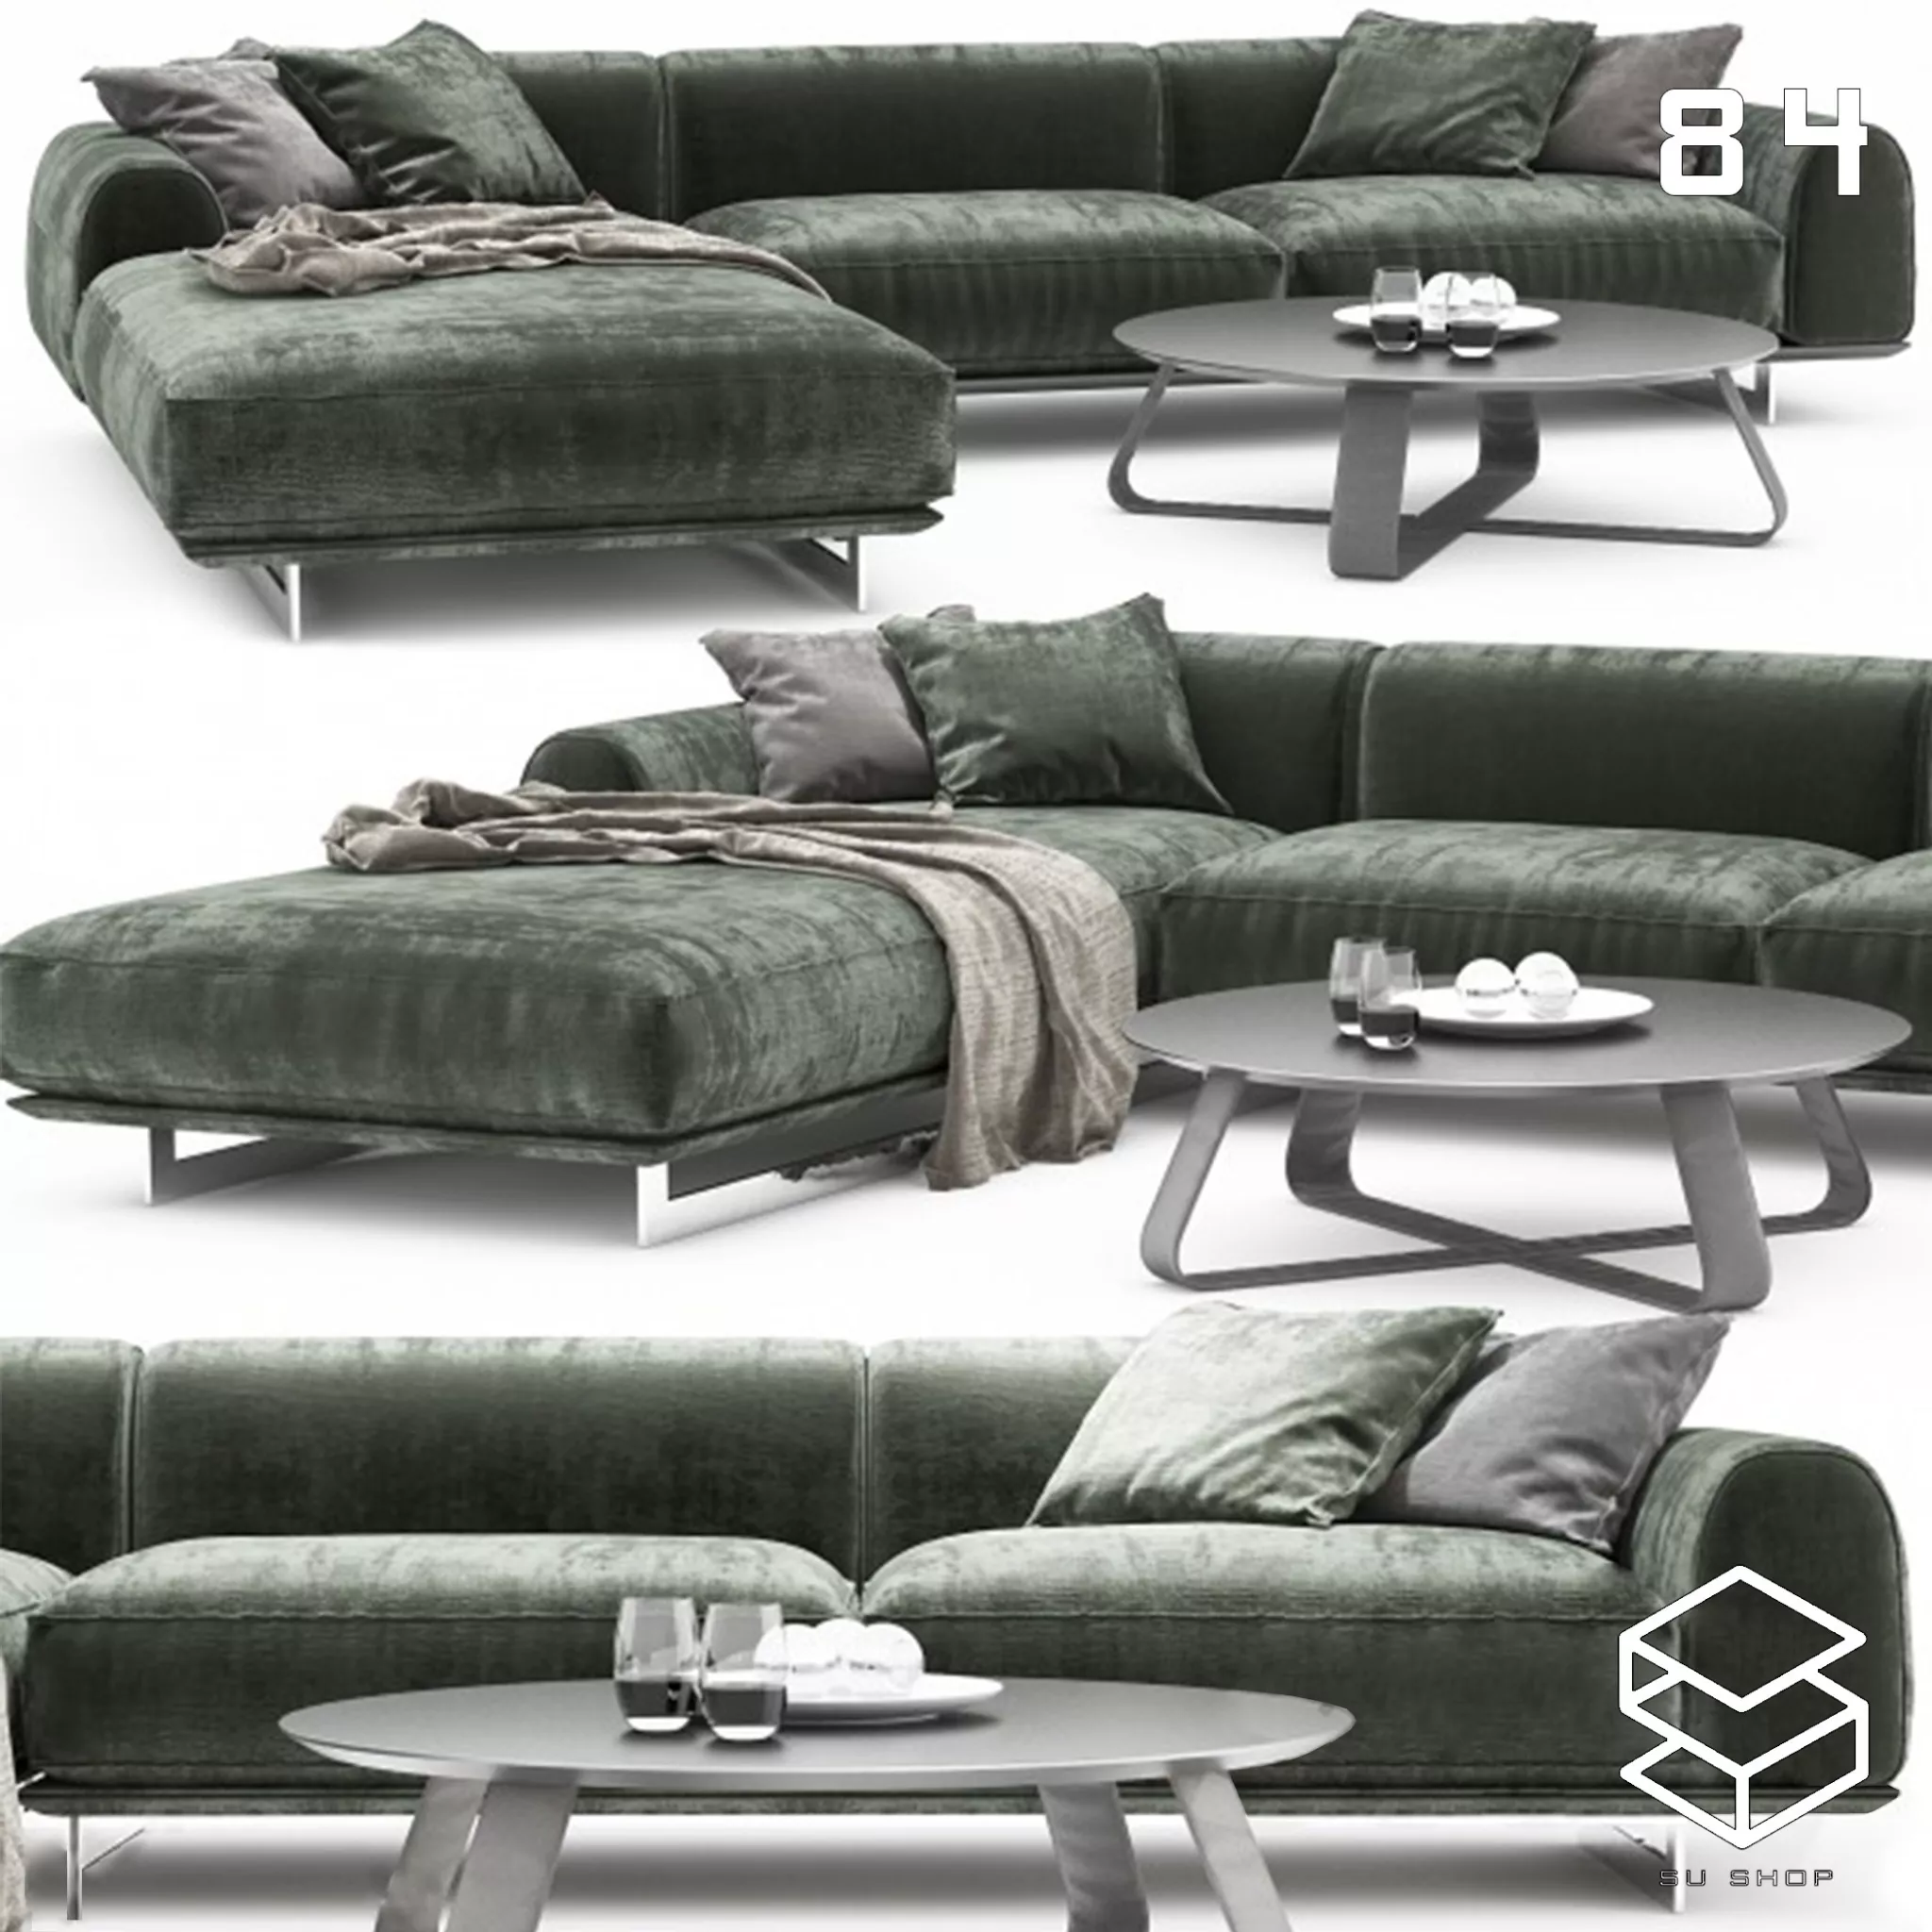 MODERN SOFA - SKETCHUP 3D MODEL - VRAY OR ENSCAPE - ID13712